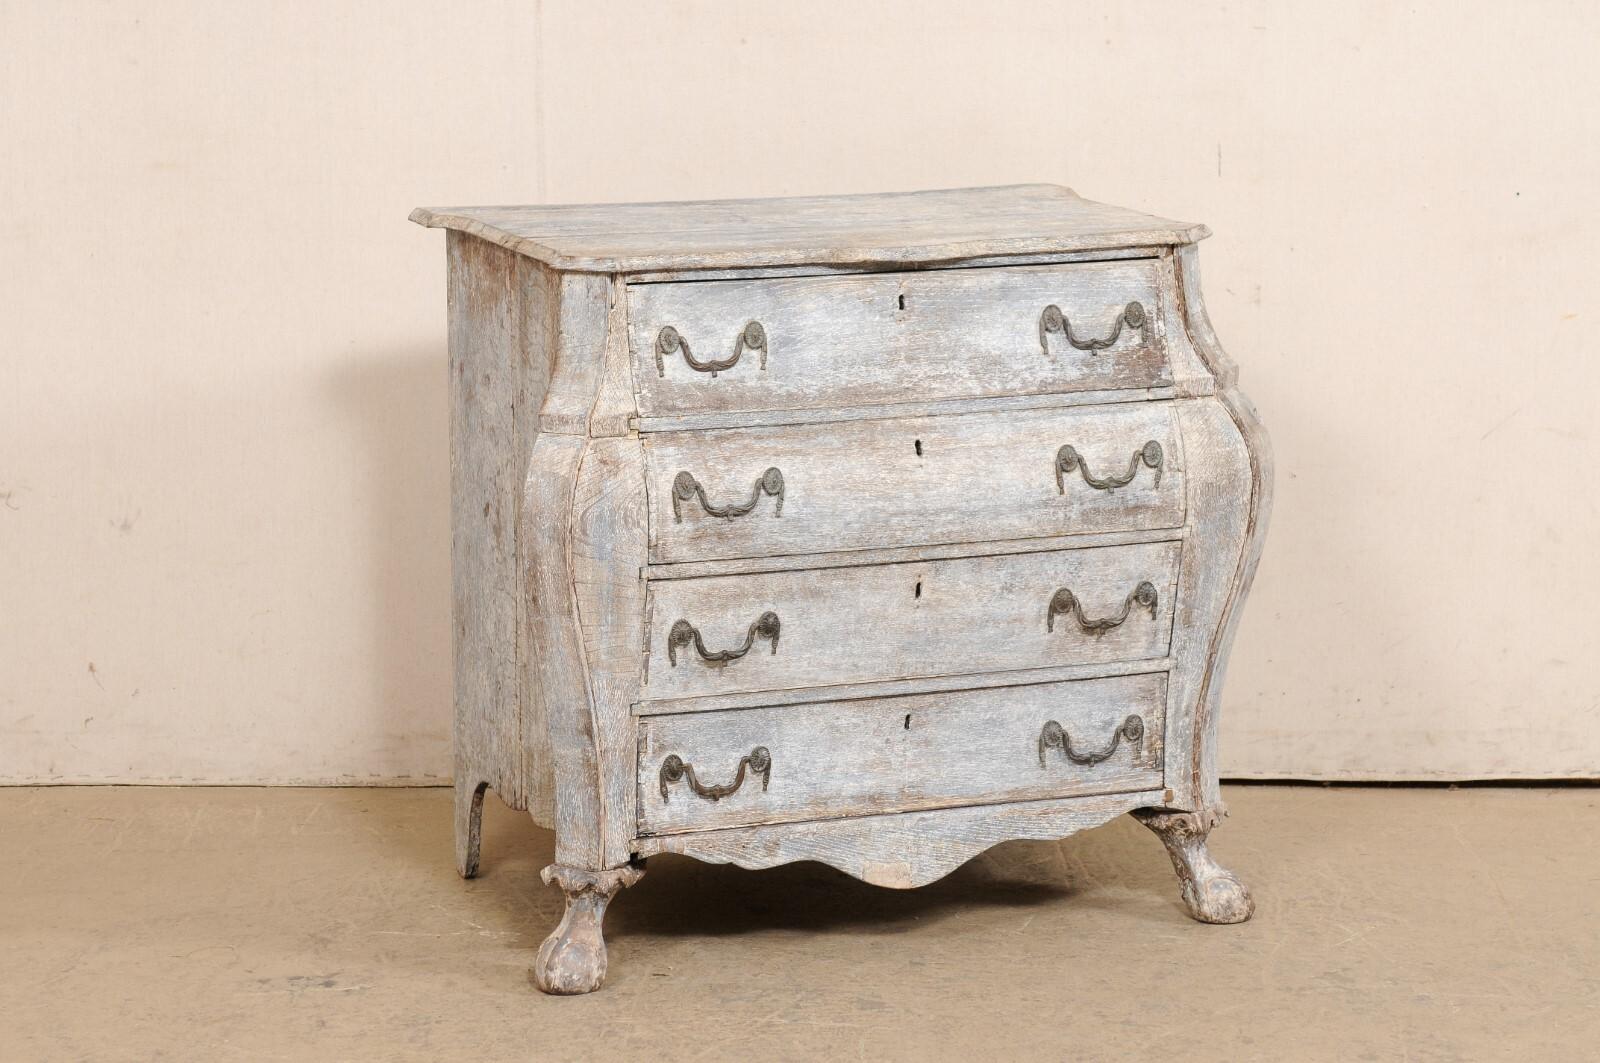 A French bombé style painted wood commode from the turn of the 18th and 19th century. This antique chest from France features a shapely top with canted front corners and center/front scallop, atop a case that houses four full-sized chests flanked